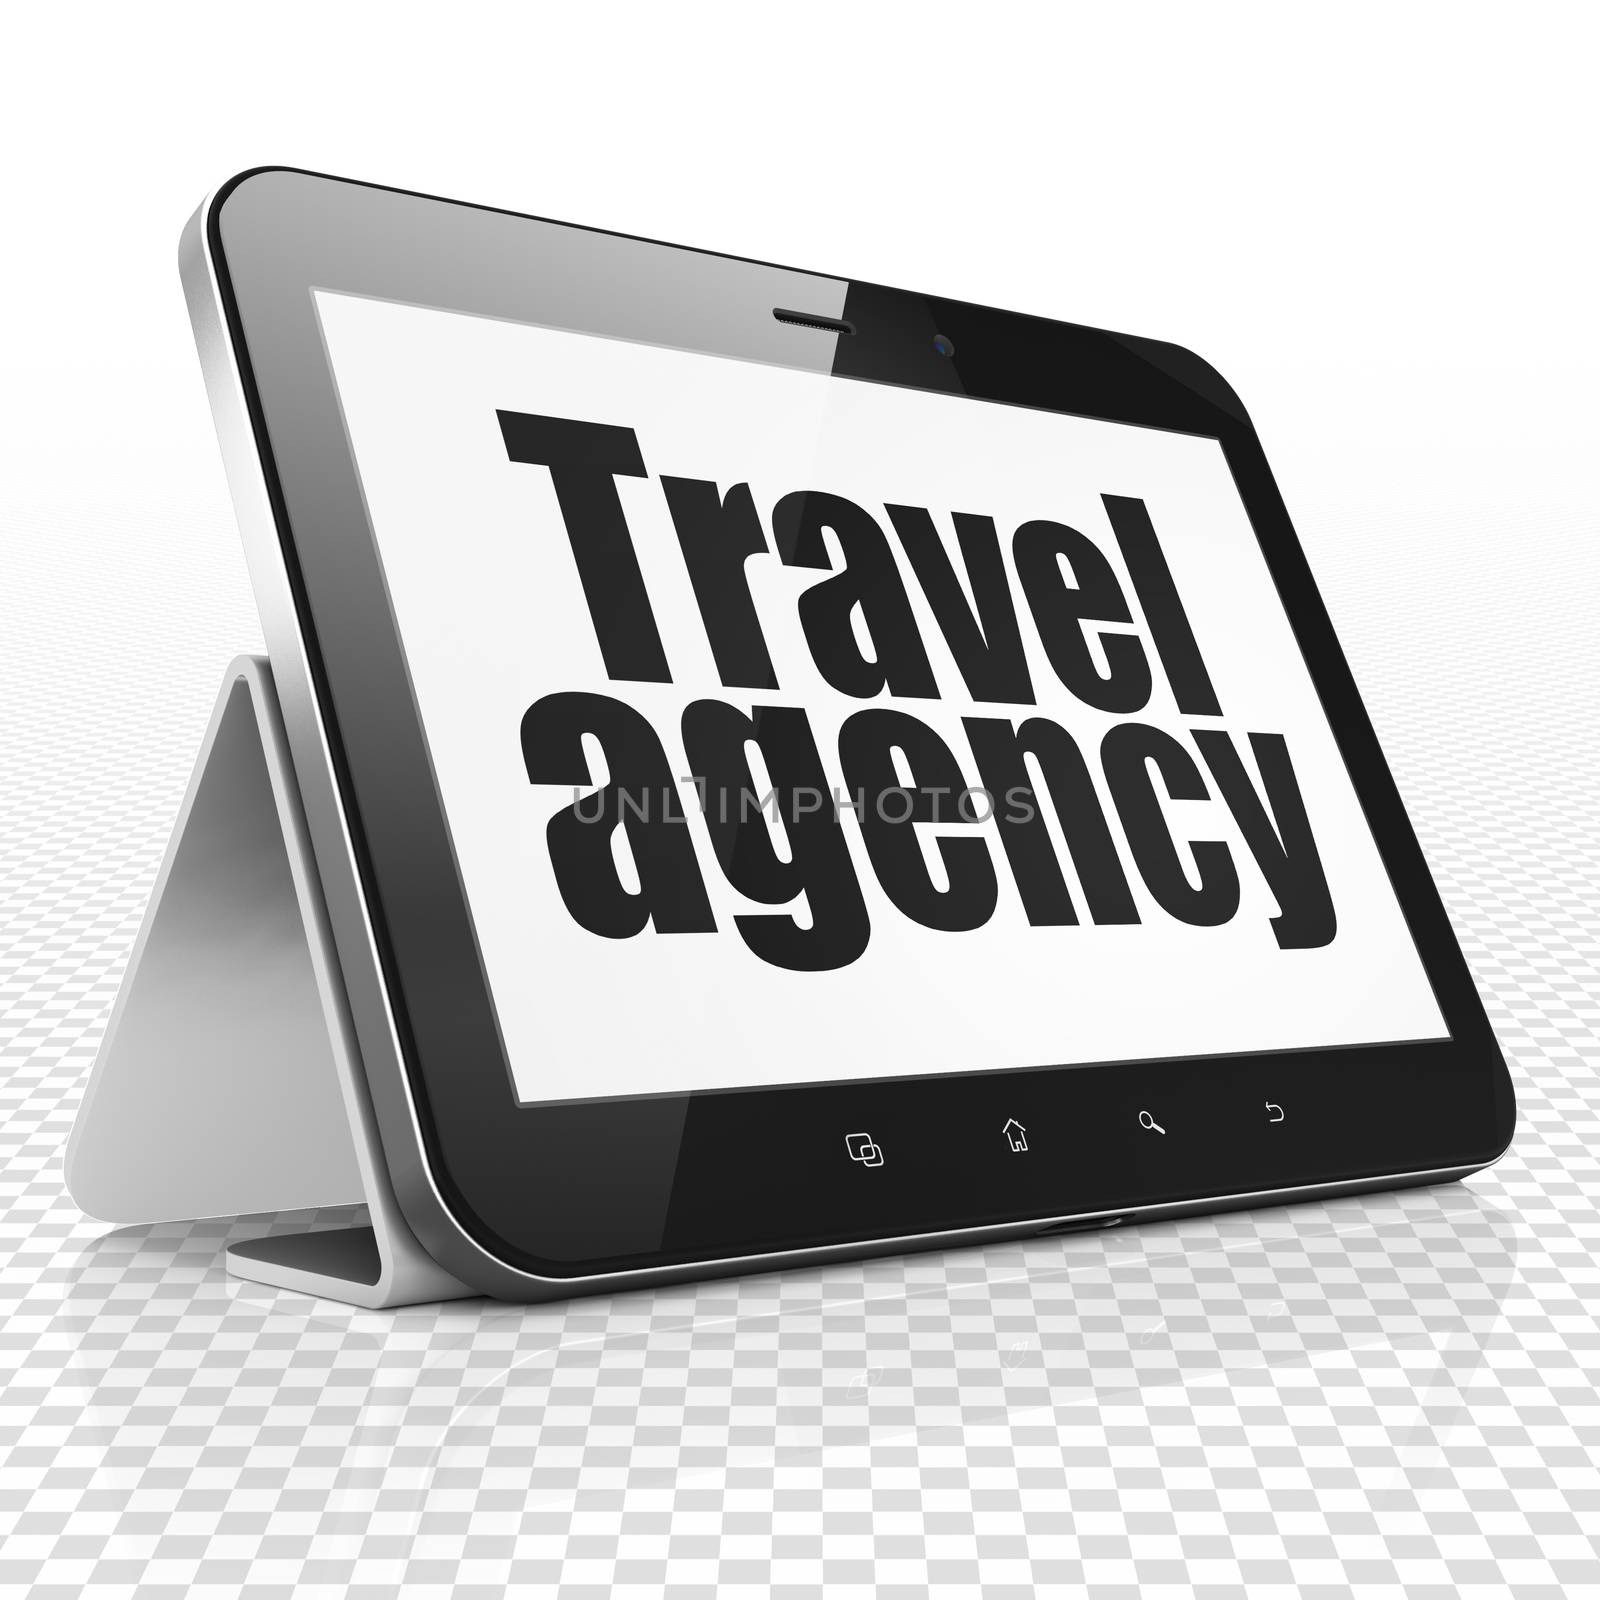 Vacation concept: Tablet Computer with black text Travel Agency on display